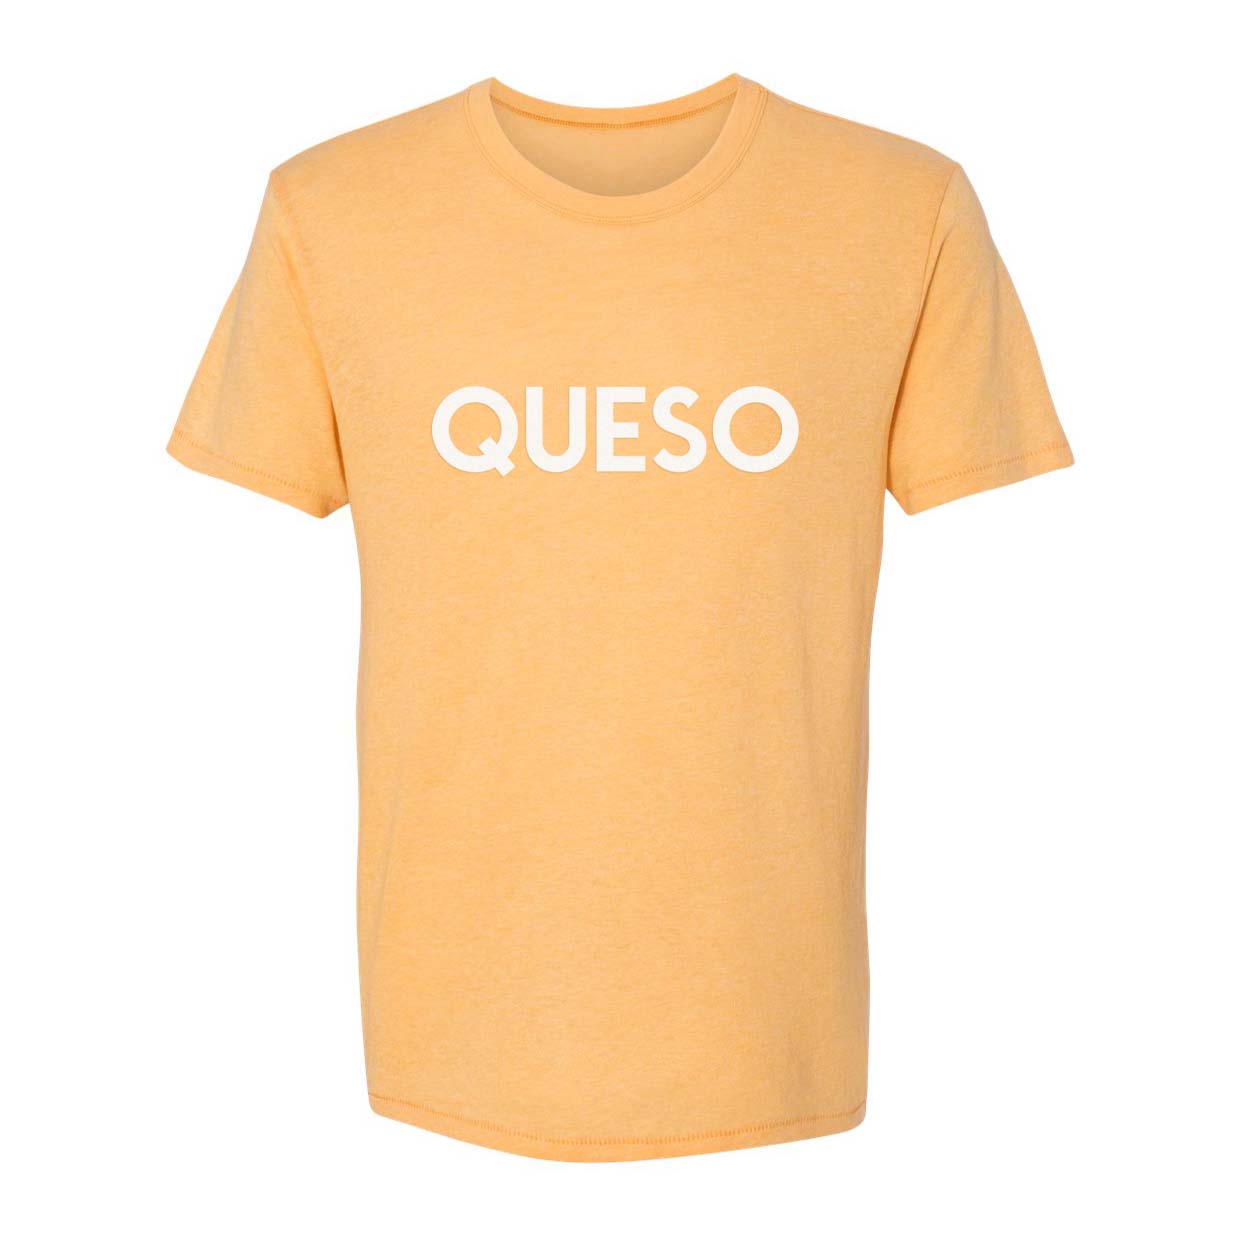 Queso Soft Tee